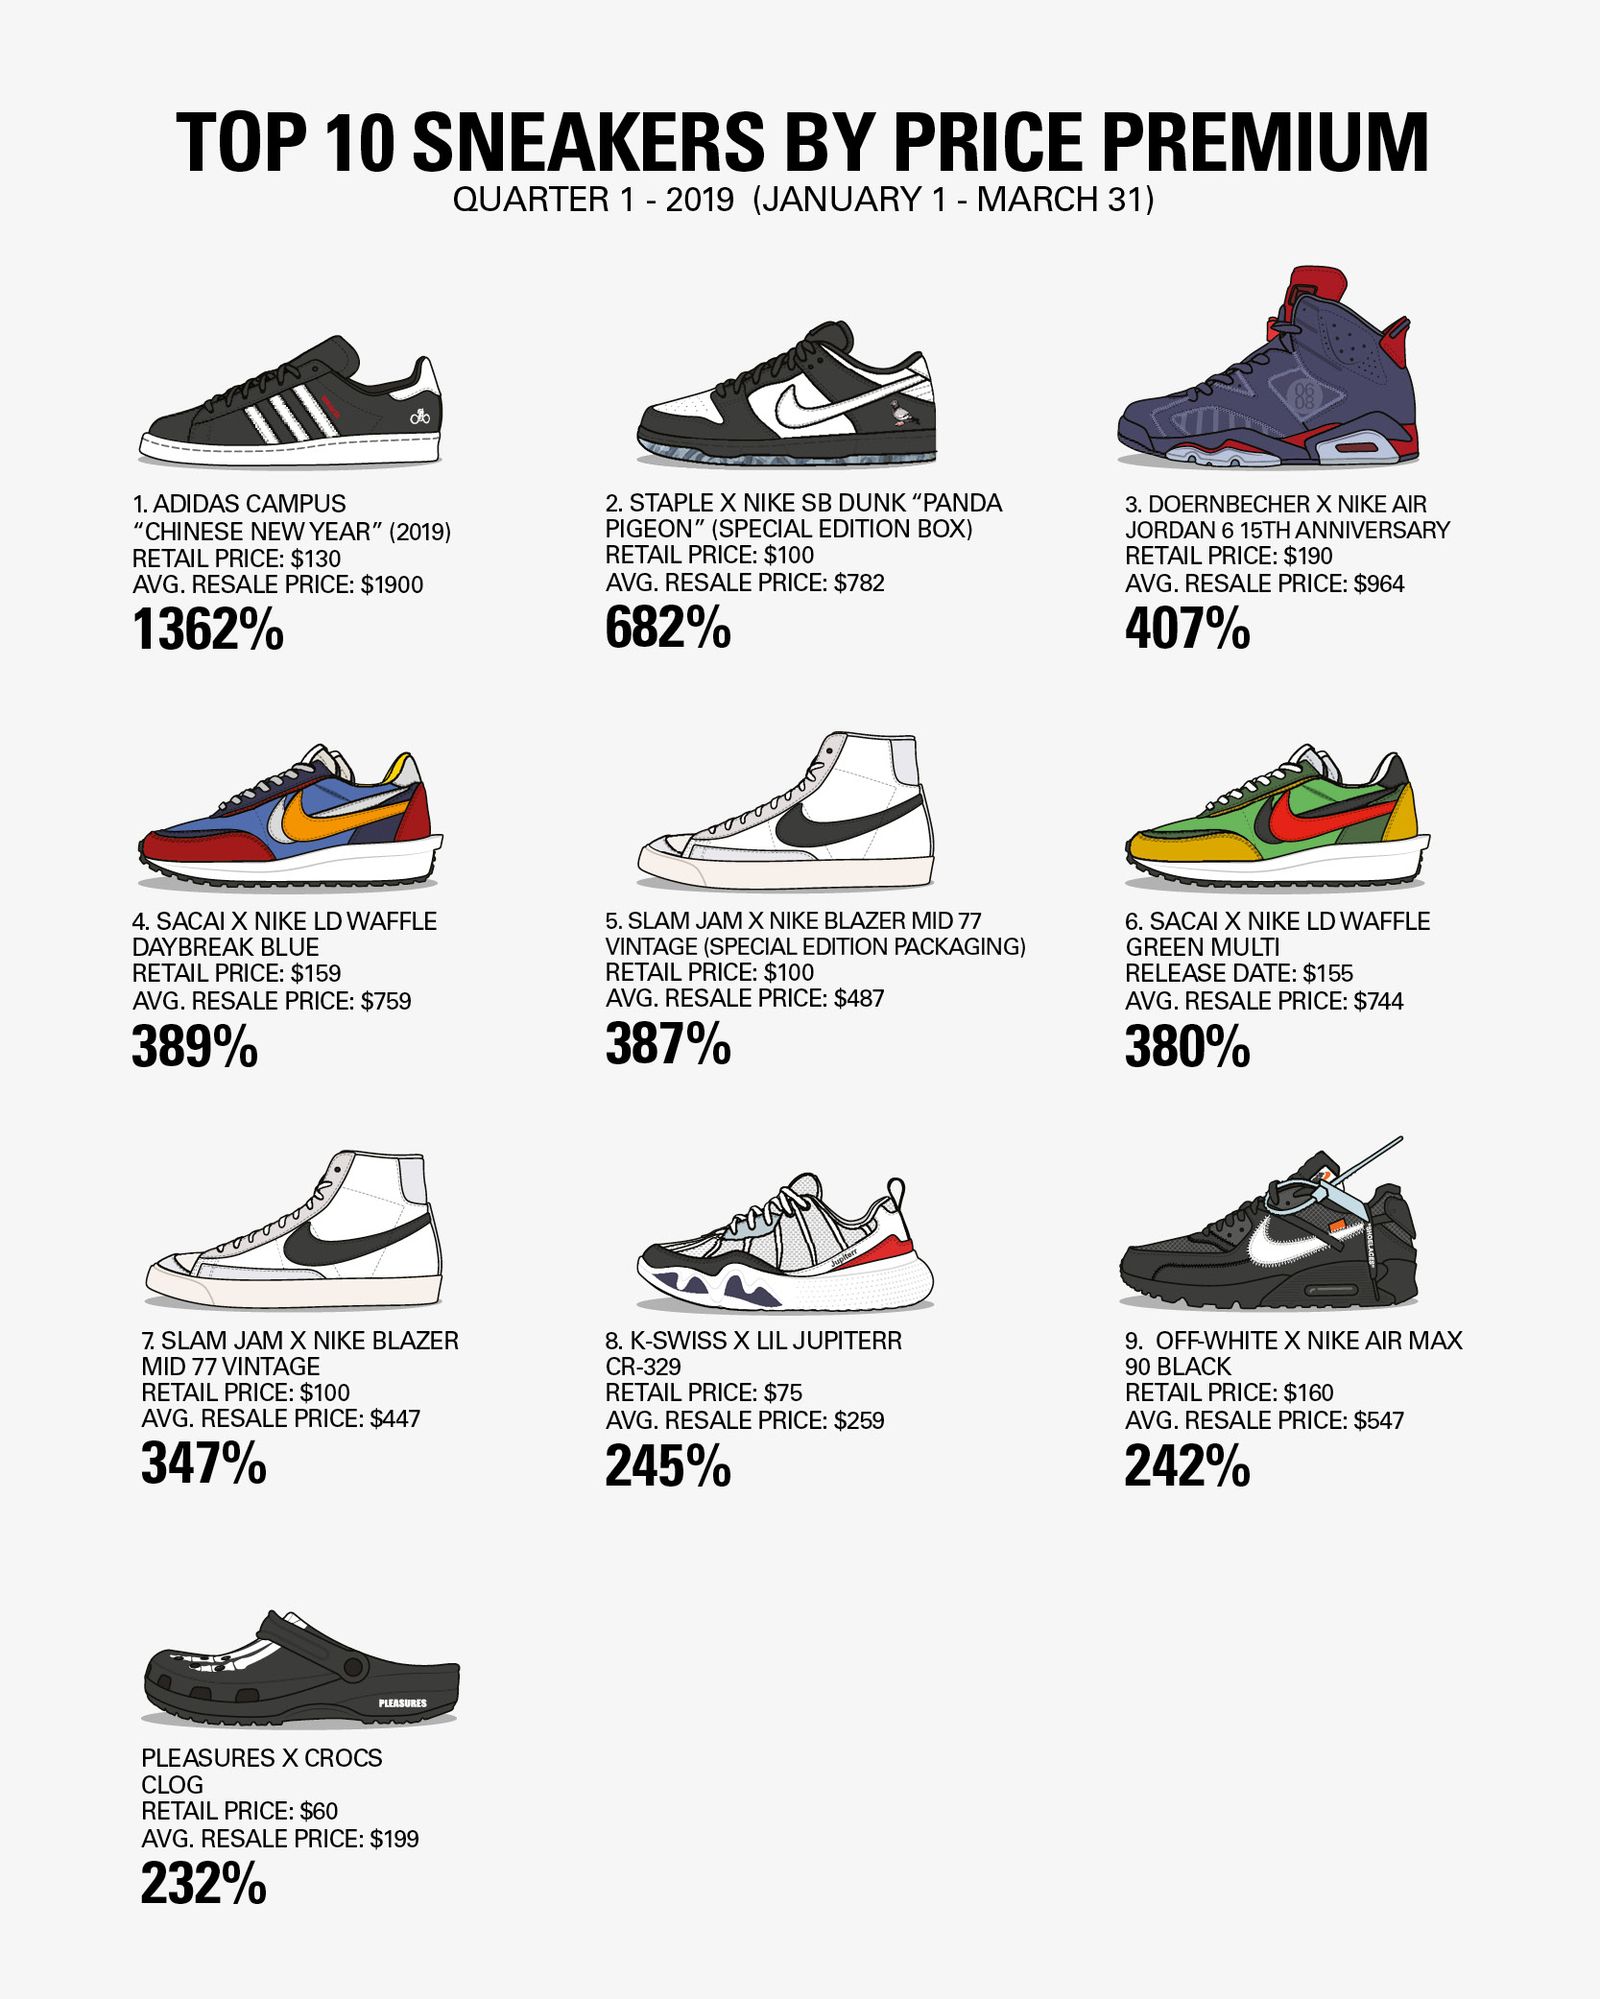 most valuable sneakers 2019 q 1 Adidas Nike